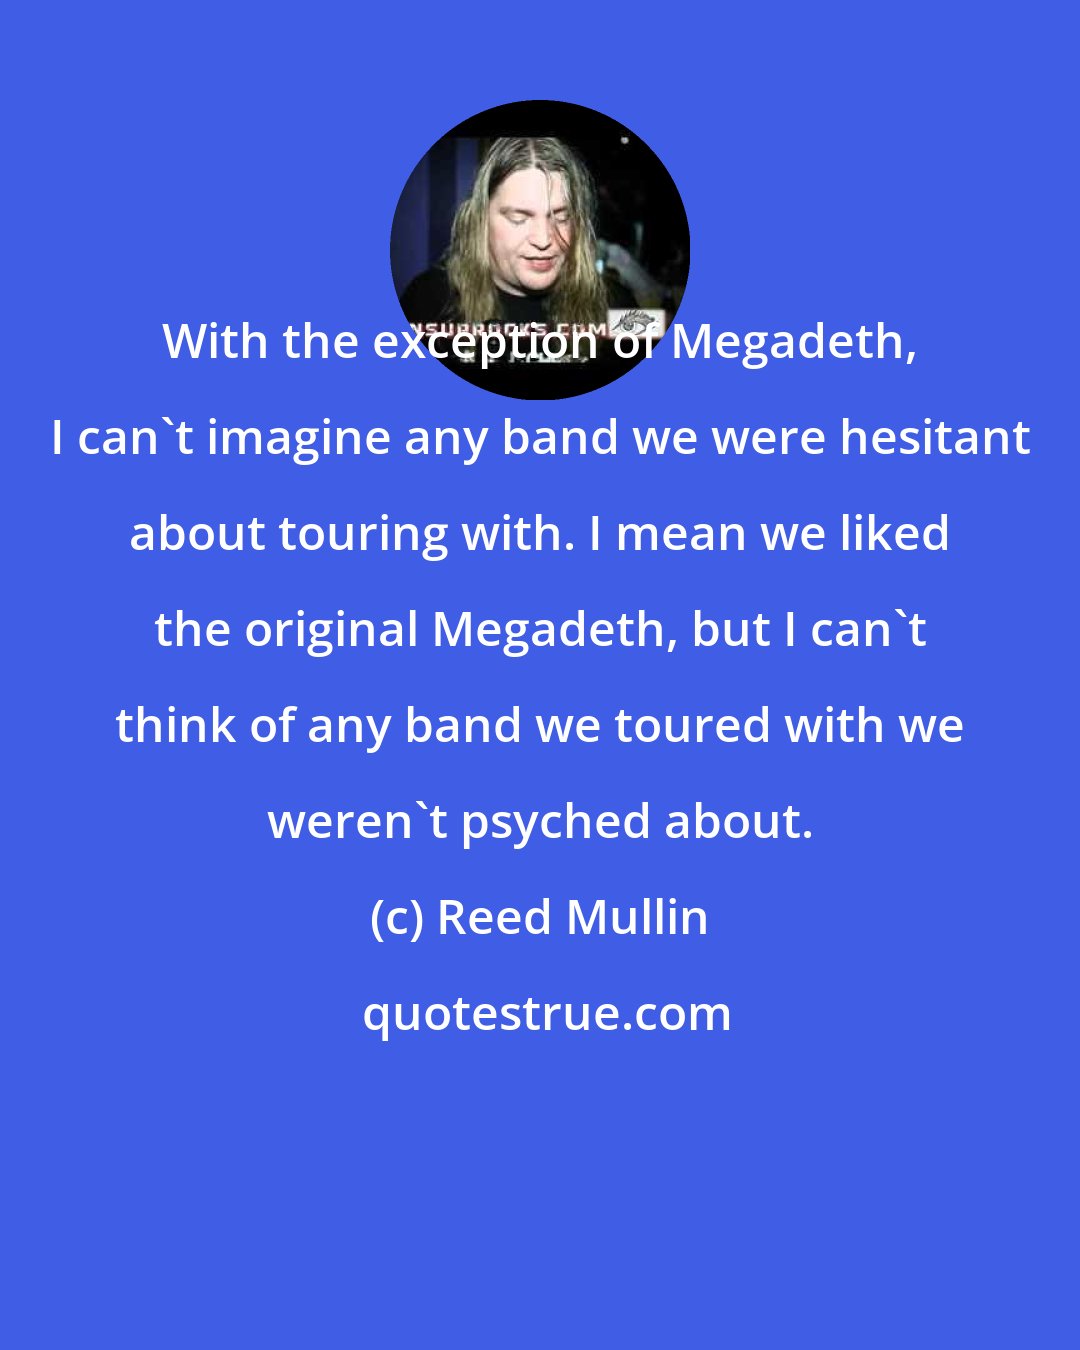 Reed Mullin: With the exception of Megadeth, I can't imagine any band we were hesitant about touring with. I mean we liked the original Megadeth, but I can't think of any band we toured with we weren't psyched about.